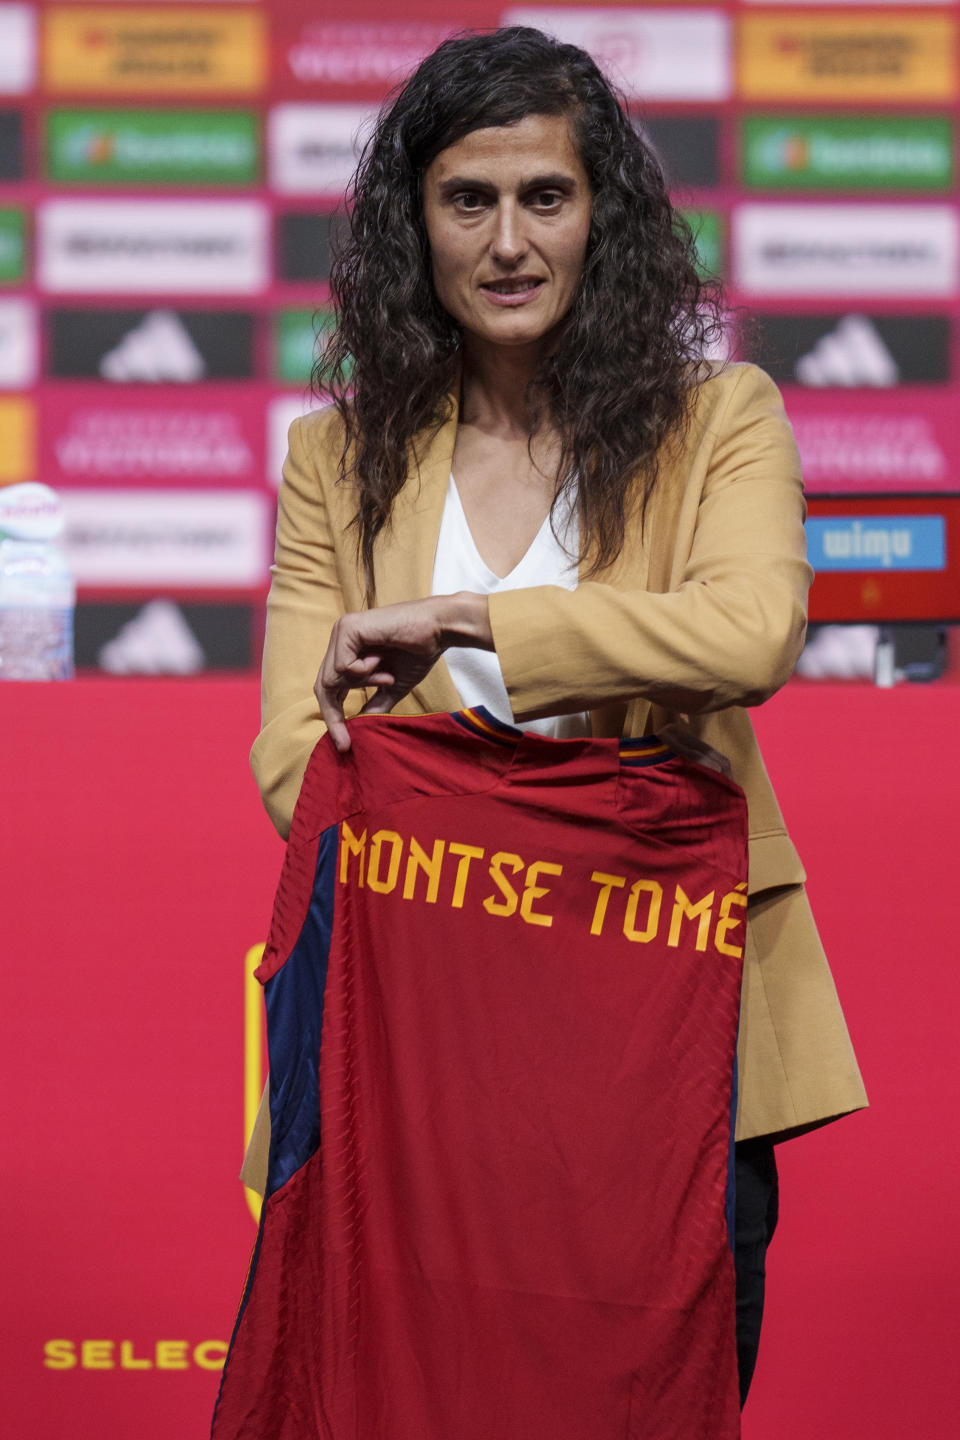 Spain's new women's national team coach Montse Tome, holds a jersey during her official presentation at the Spanish soccer federation headquarters in Las Rozas, just outside of Madrid, Spain, Monday, Sept. 18, 2023. Tome replaced Jorge Vilda less than three weeks after Spain won the Women's World Cup title and amid the controversy involving suspended federation president Luis Rubiales who has now resigned. (AP Photo/Manu Fernandez)